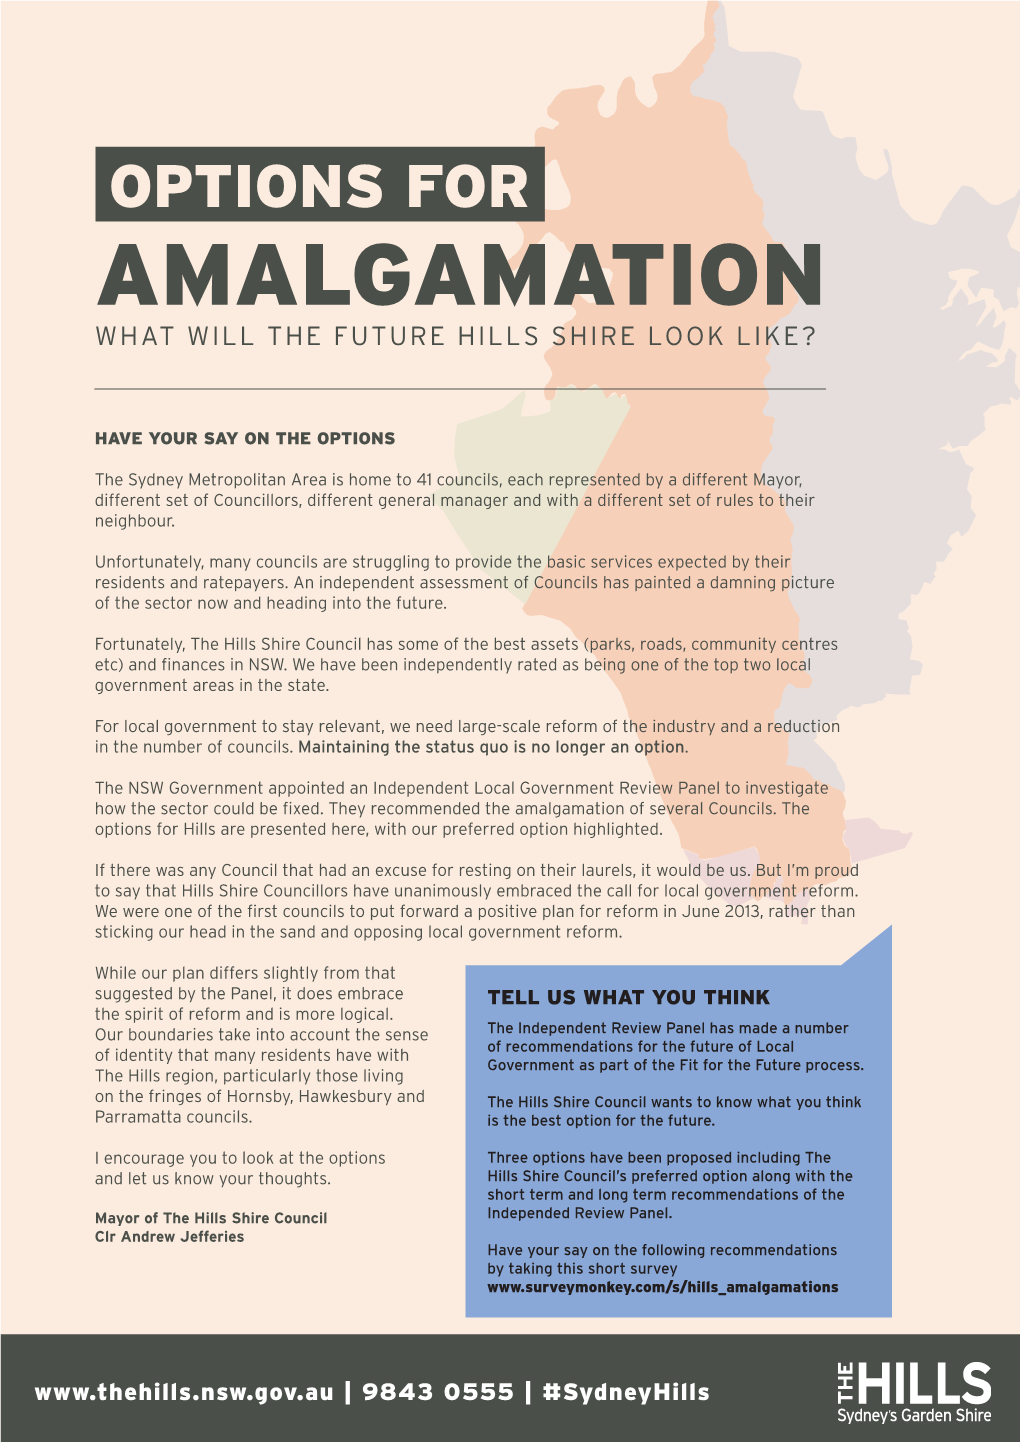 Options for Amalgamation What Will the Future Hills Shire Look Like?